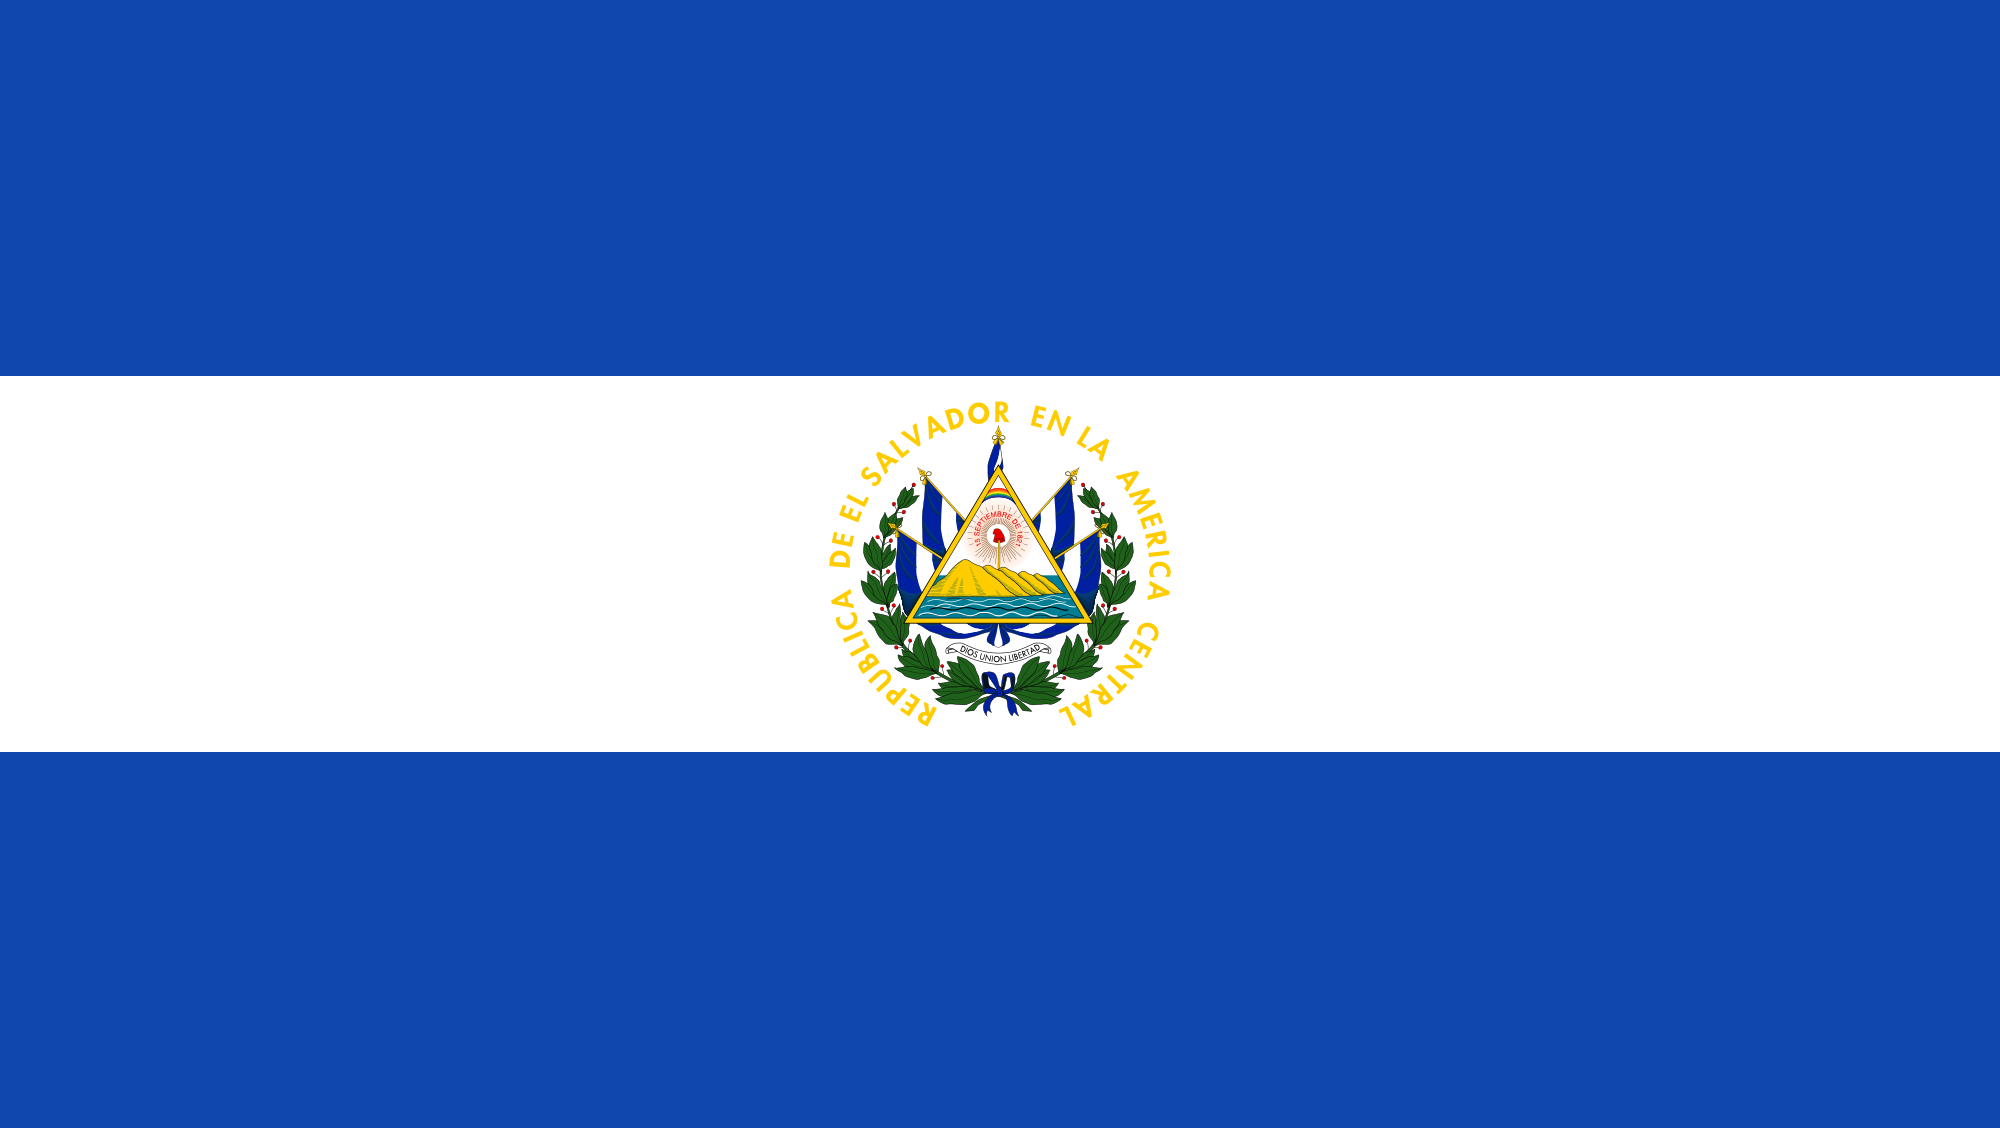 Only Smart People Can Pass This General Knowledge Quiz El Salvador flag